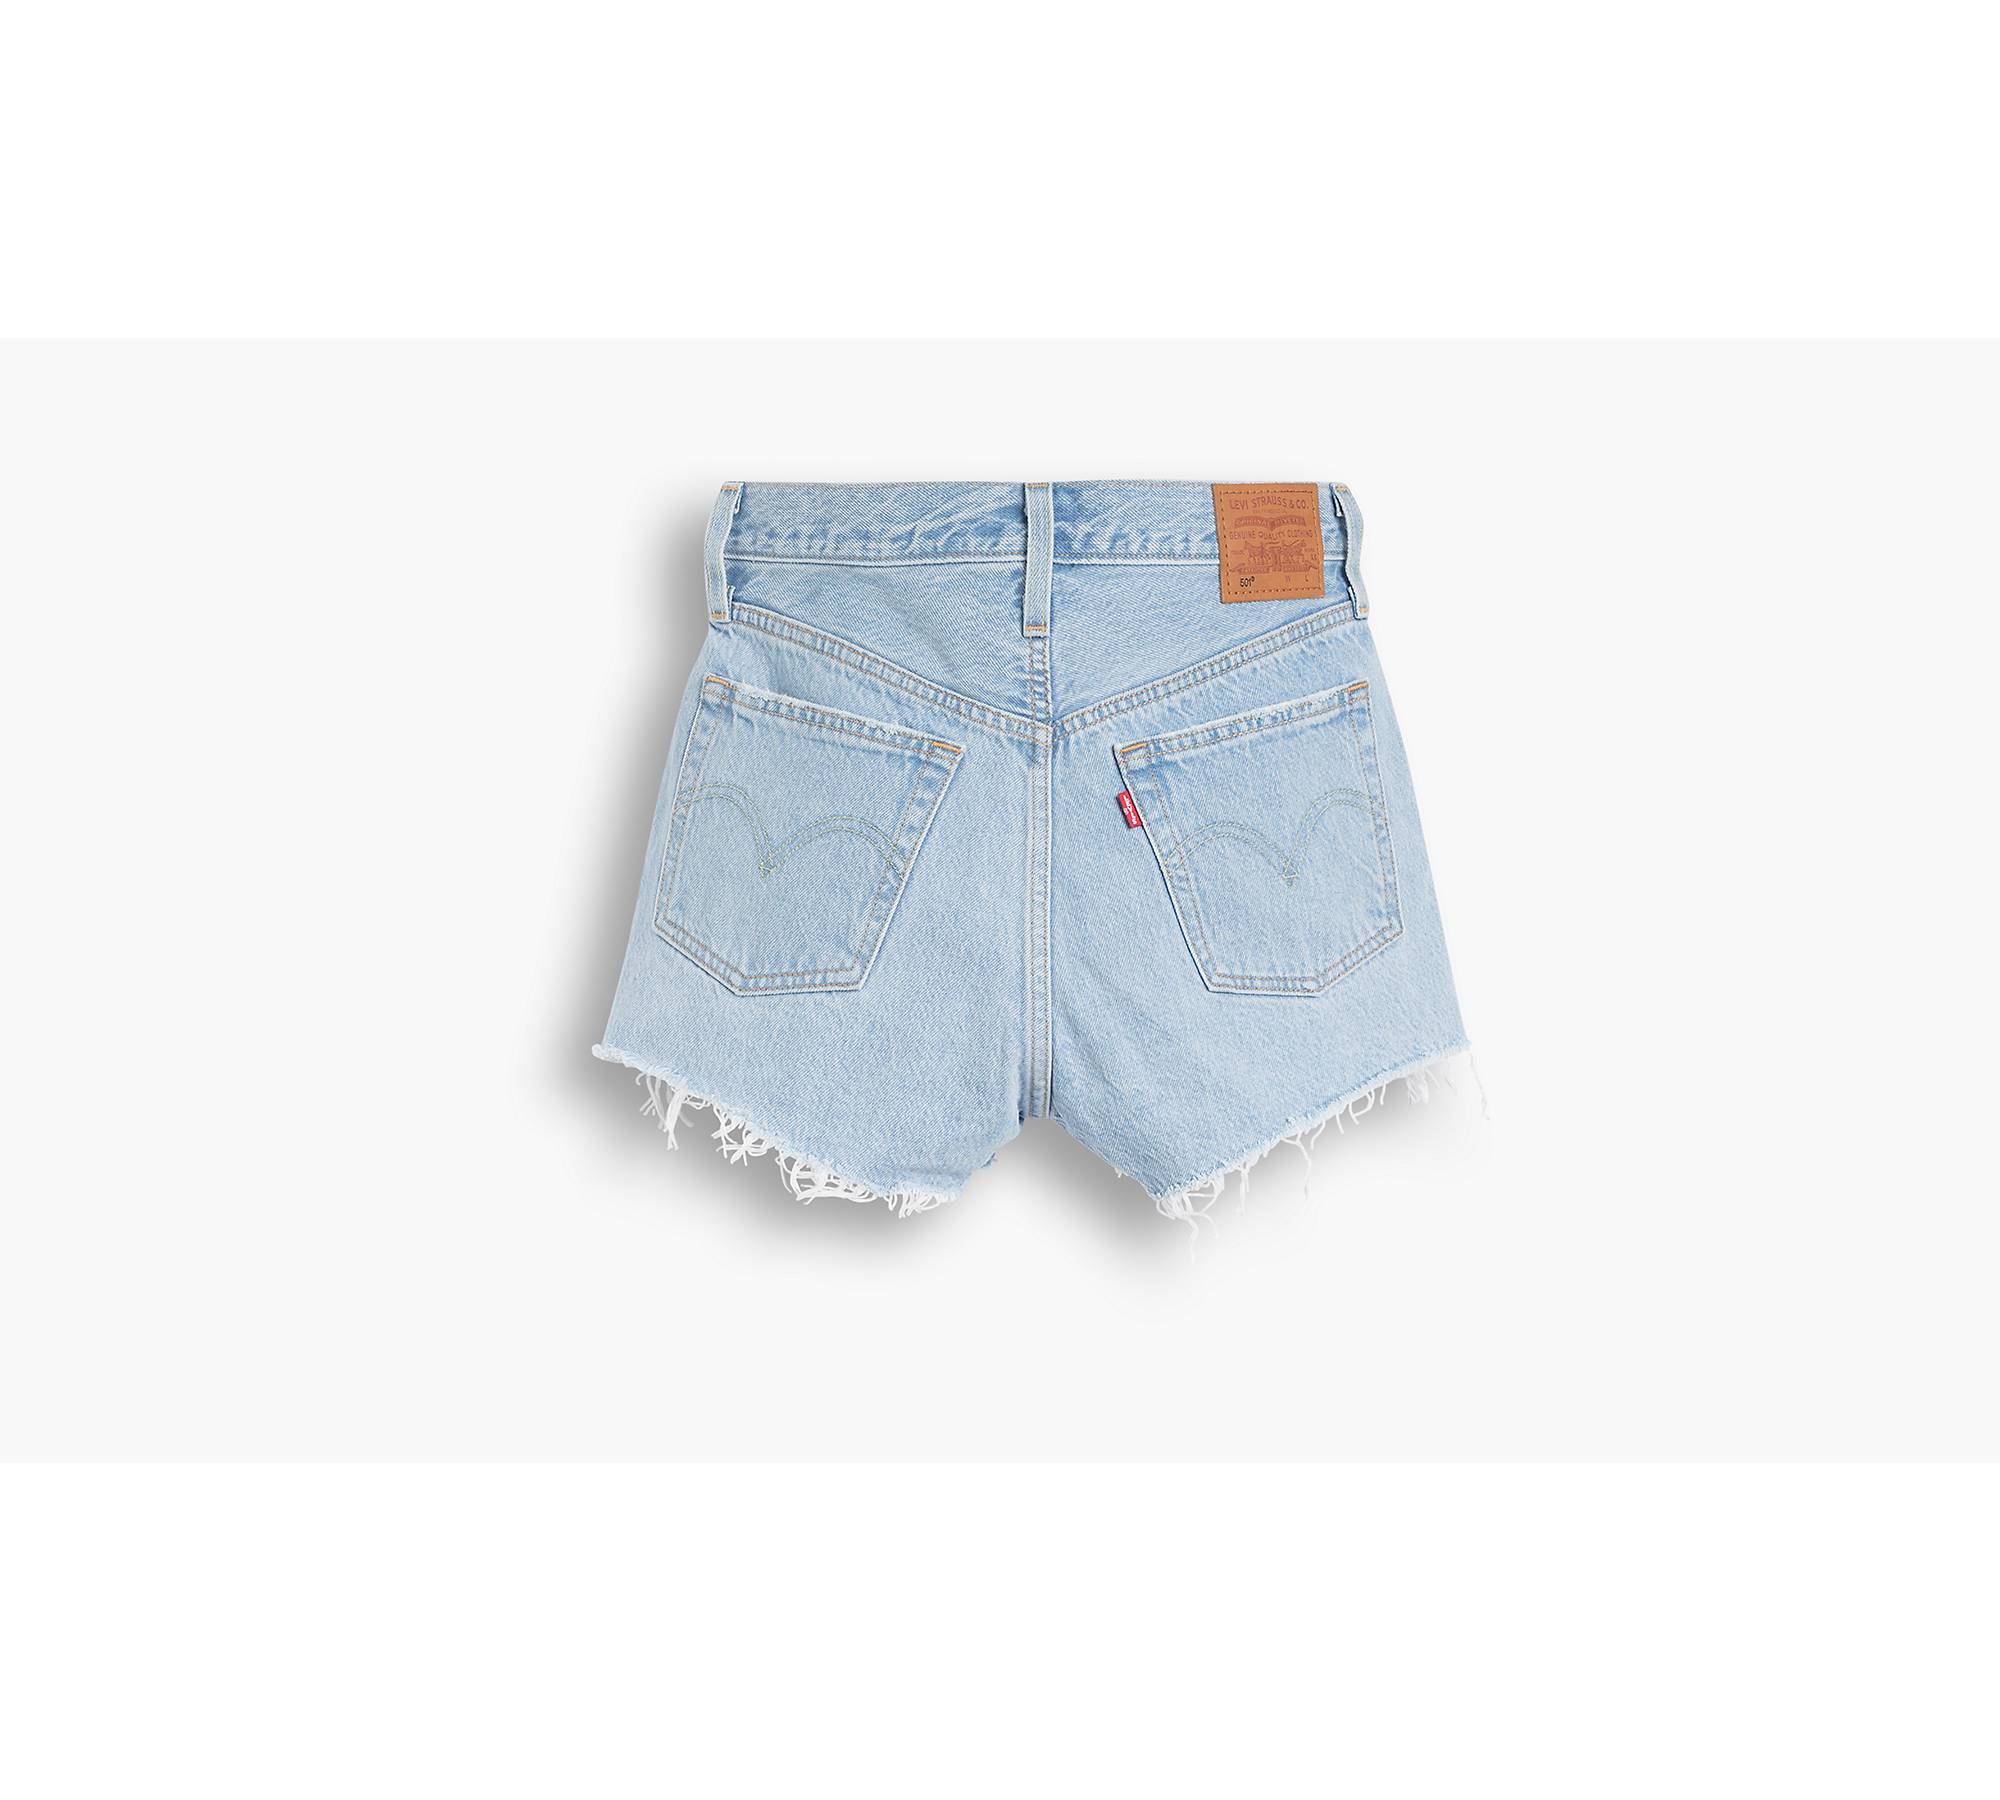 Jeans Shorts – One Leg Up Brand